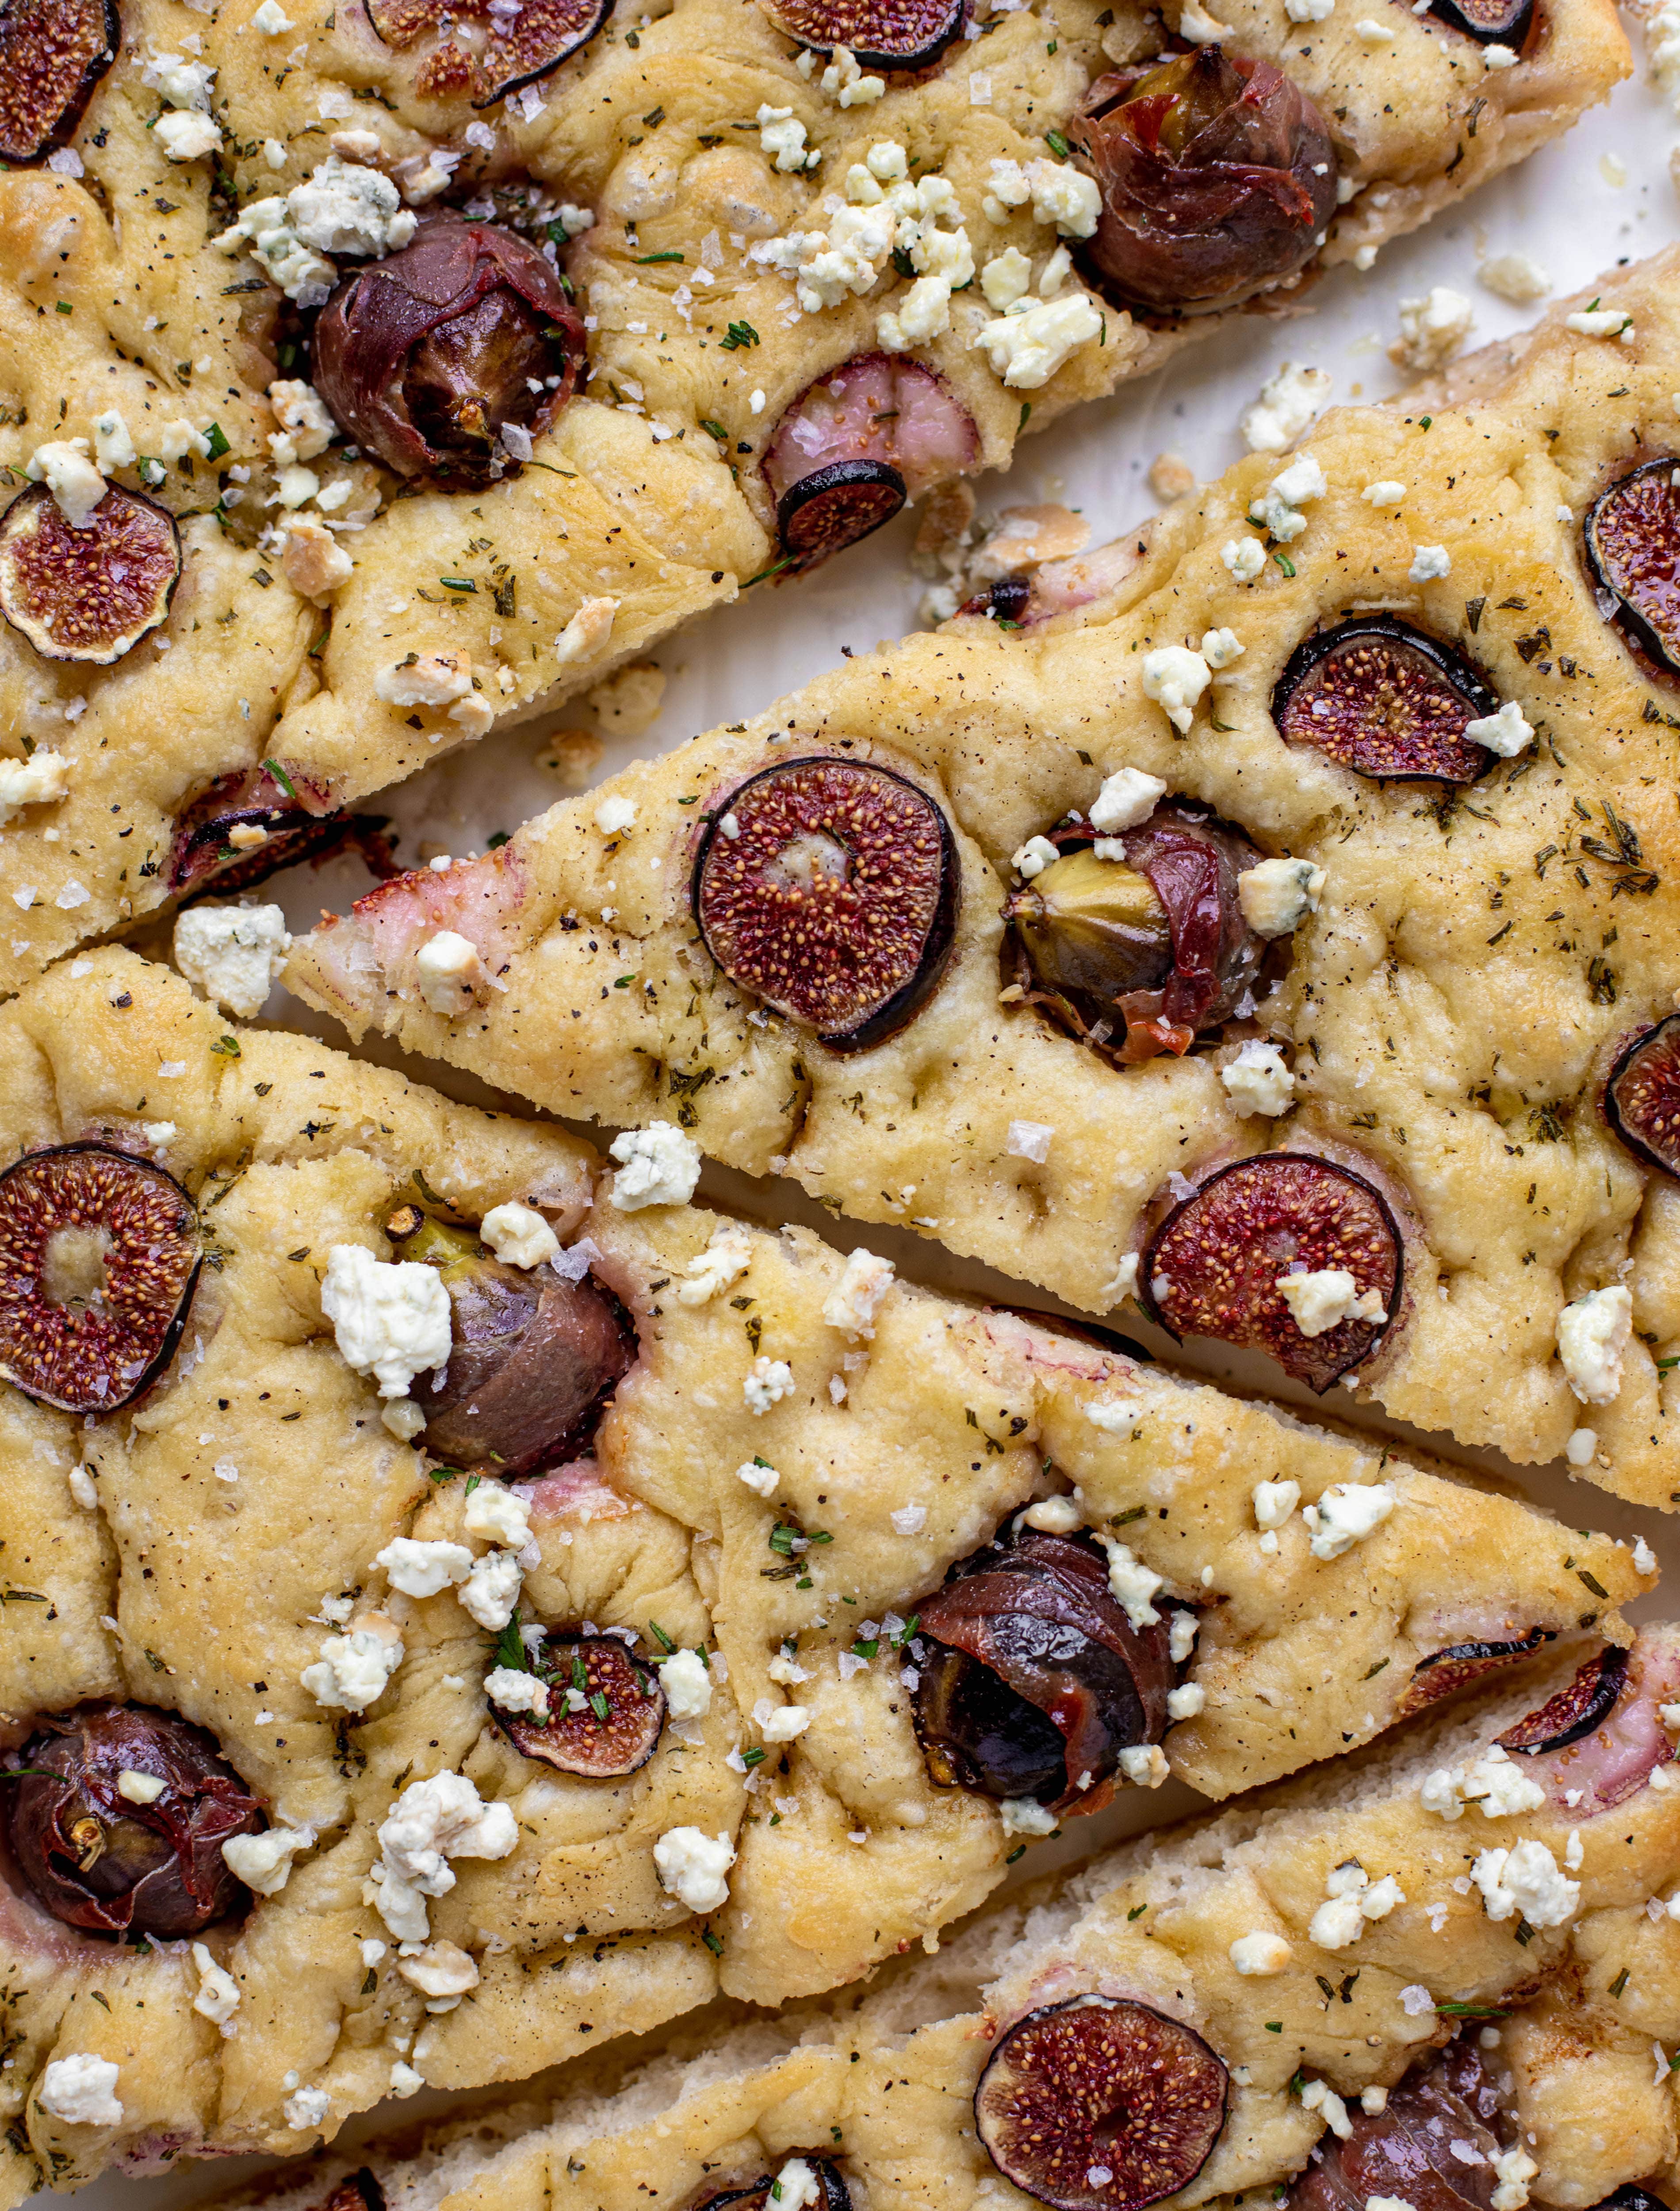 This stuffed fig focaccia bread is such an amazing way to use figs! Golden, toasty, salted focaccia studded with fig jewels. It's delicious and pretty!